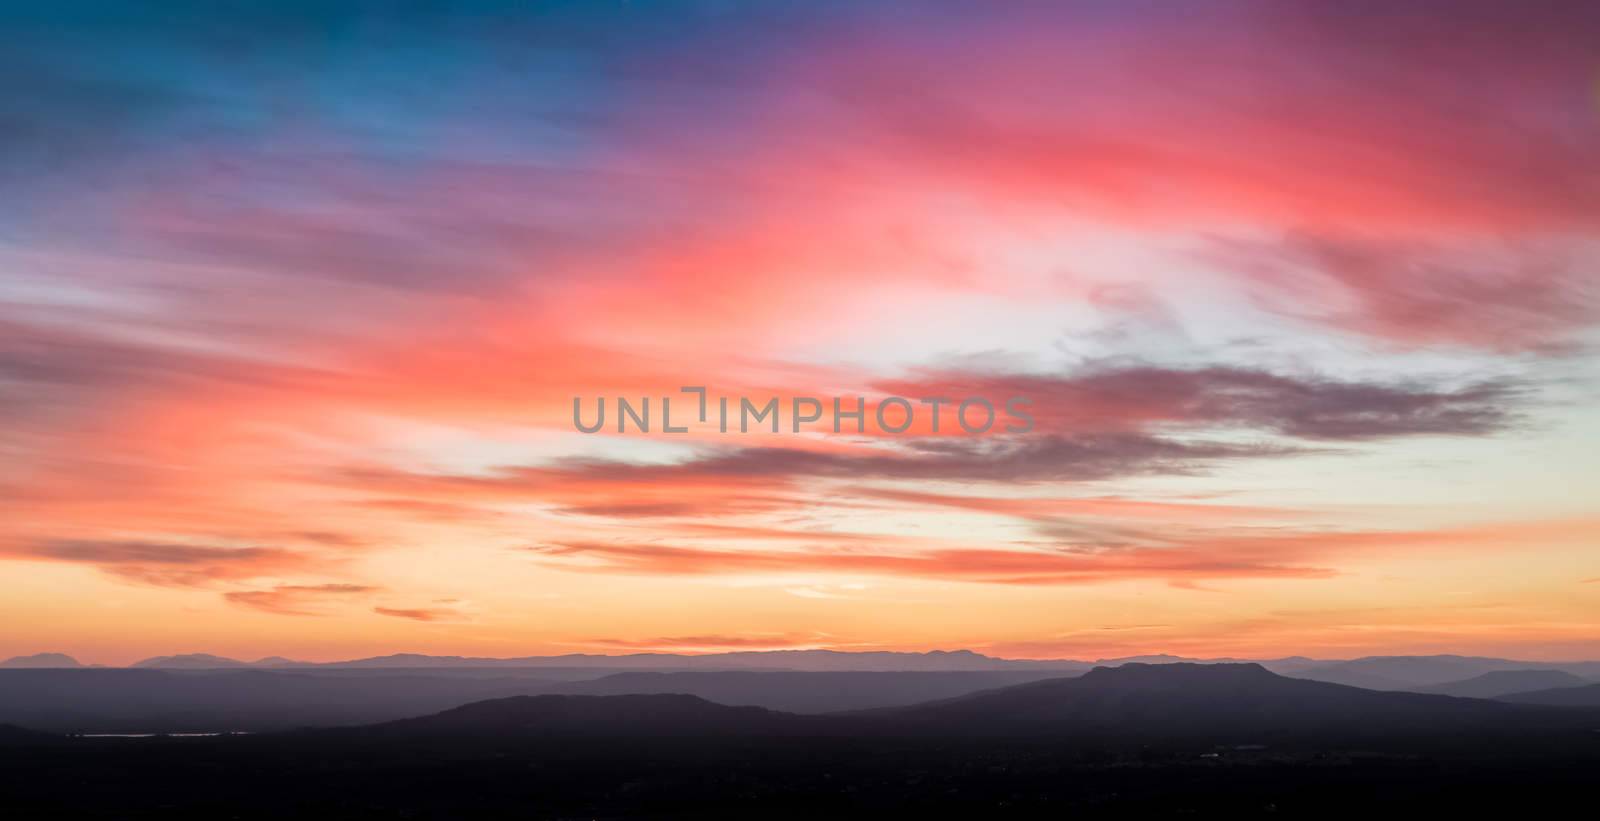 sunset scene with mountains in background, colorful sky with soft clouds